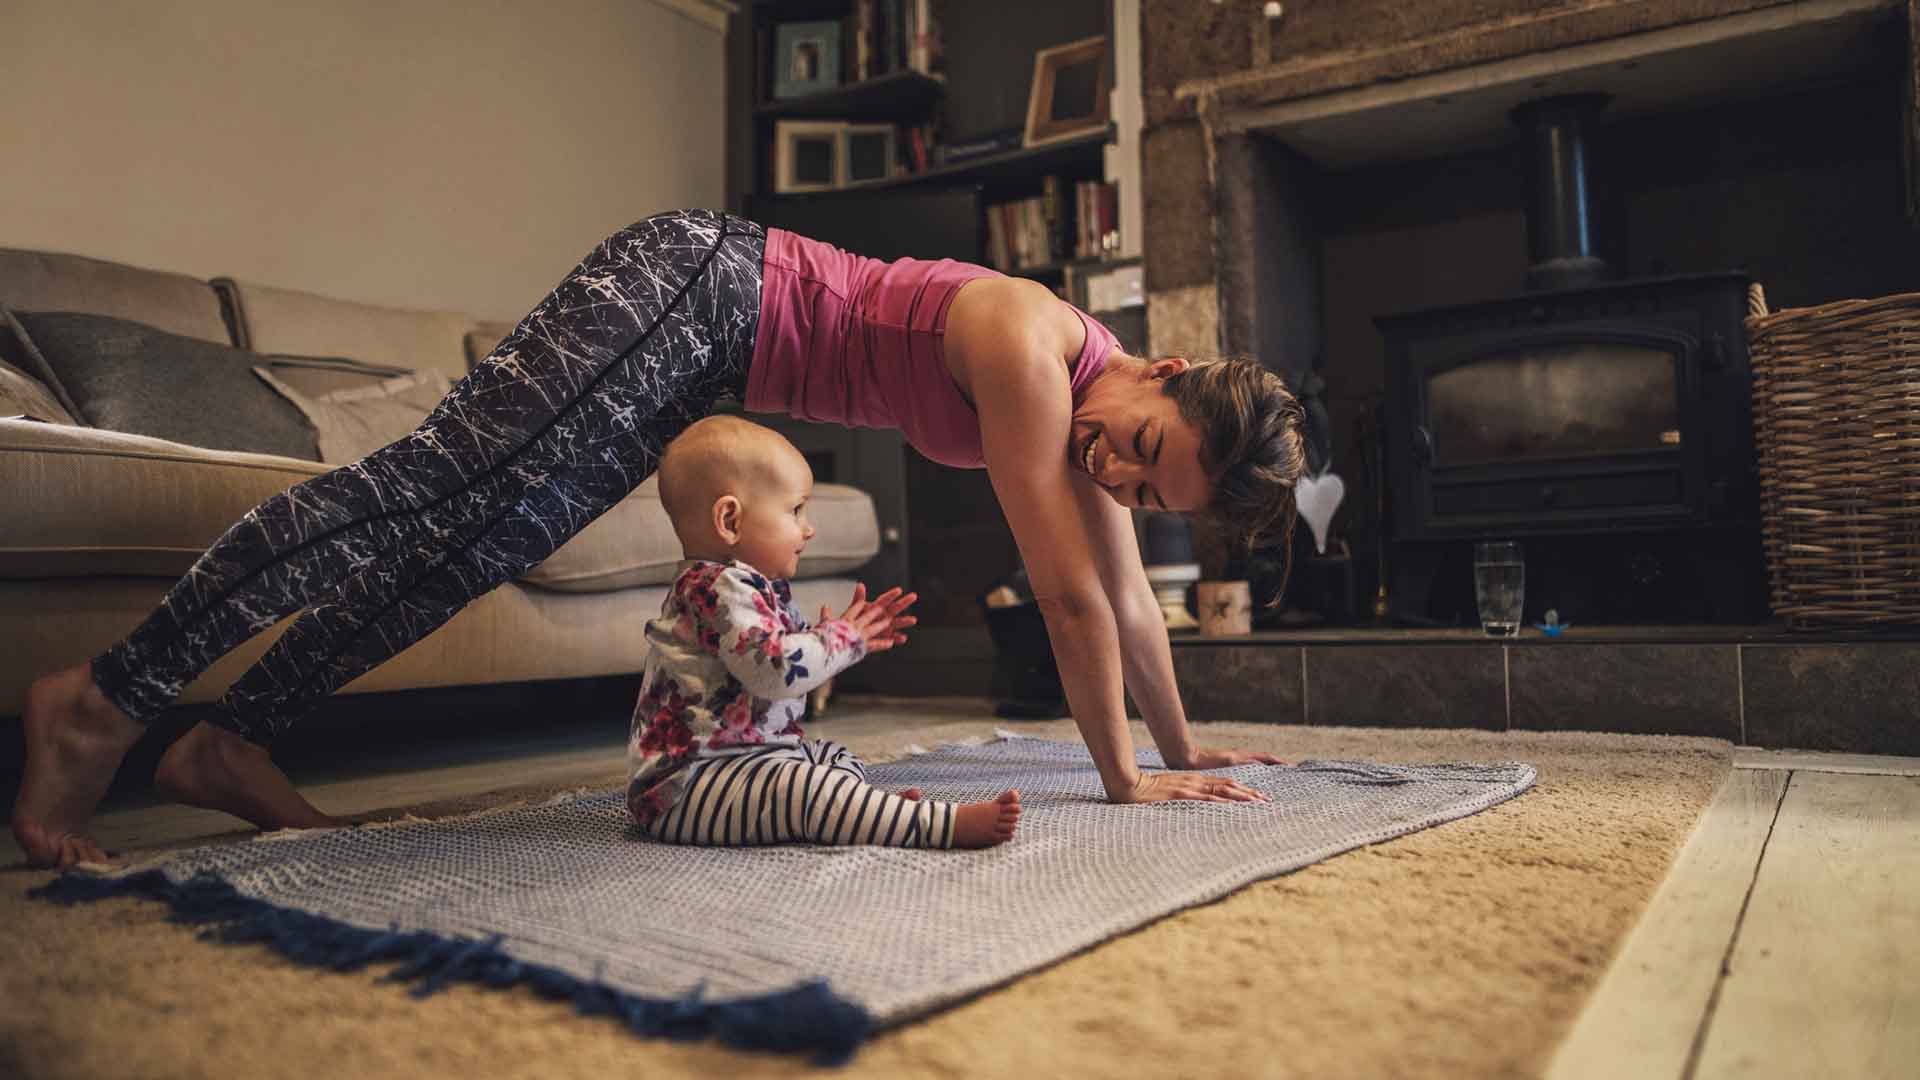 Young mother is practicing yoga in the living room of her home. Her baby daughter is sitting next to her trying to copy her.